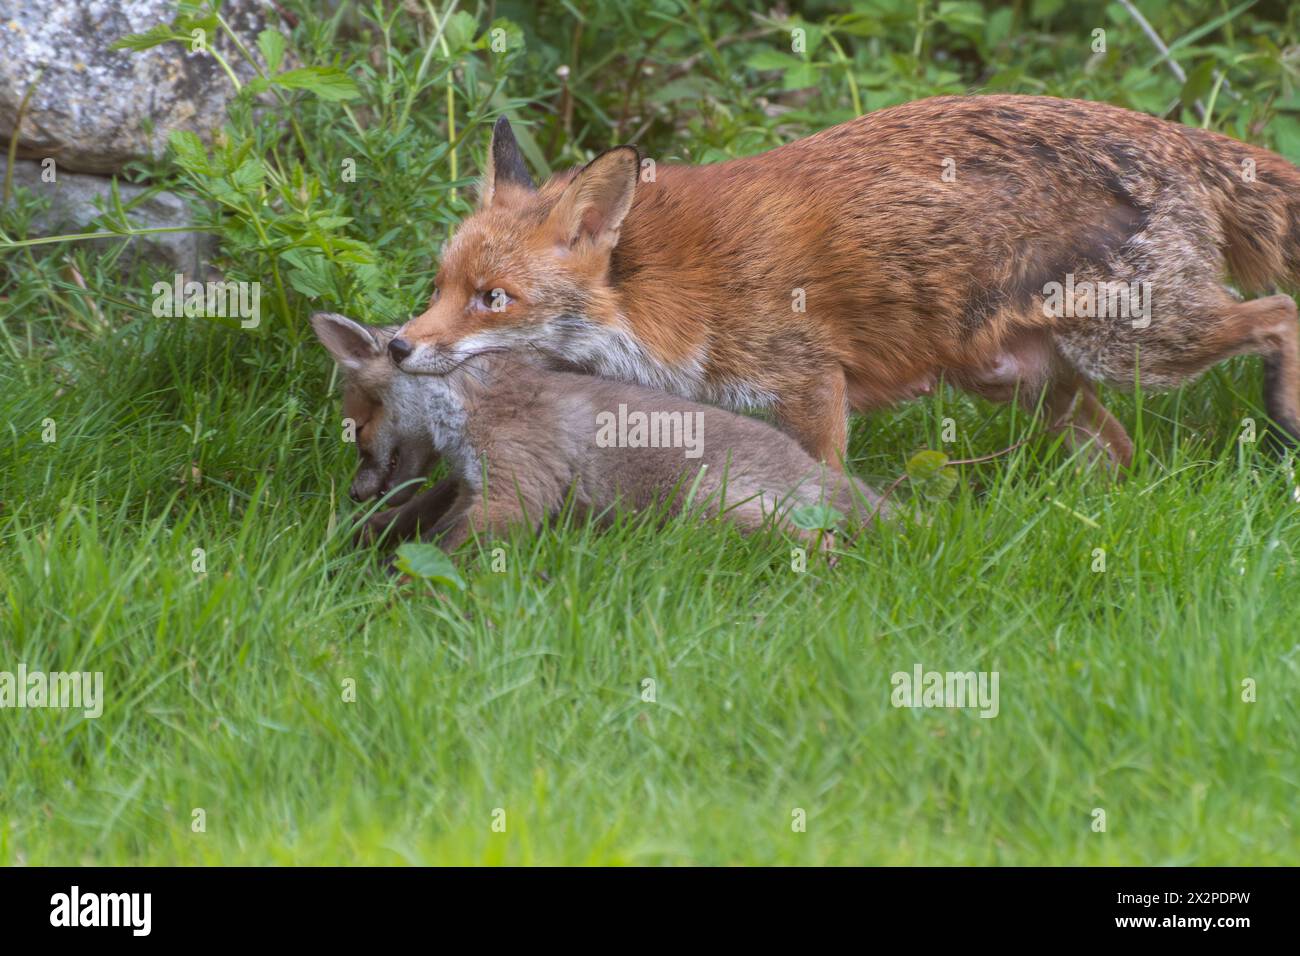 Fox vixen Vulpes vulpes moving a cub by carrying it in her mouth by the scruff of the neck, garden wildlife, England, UK Stock Photo